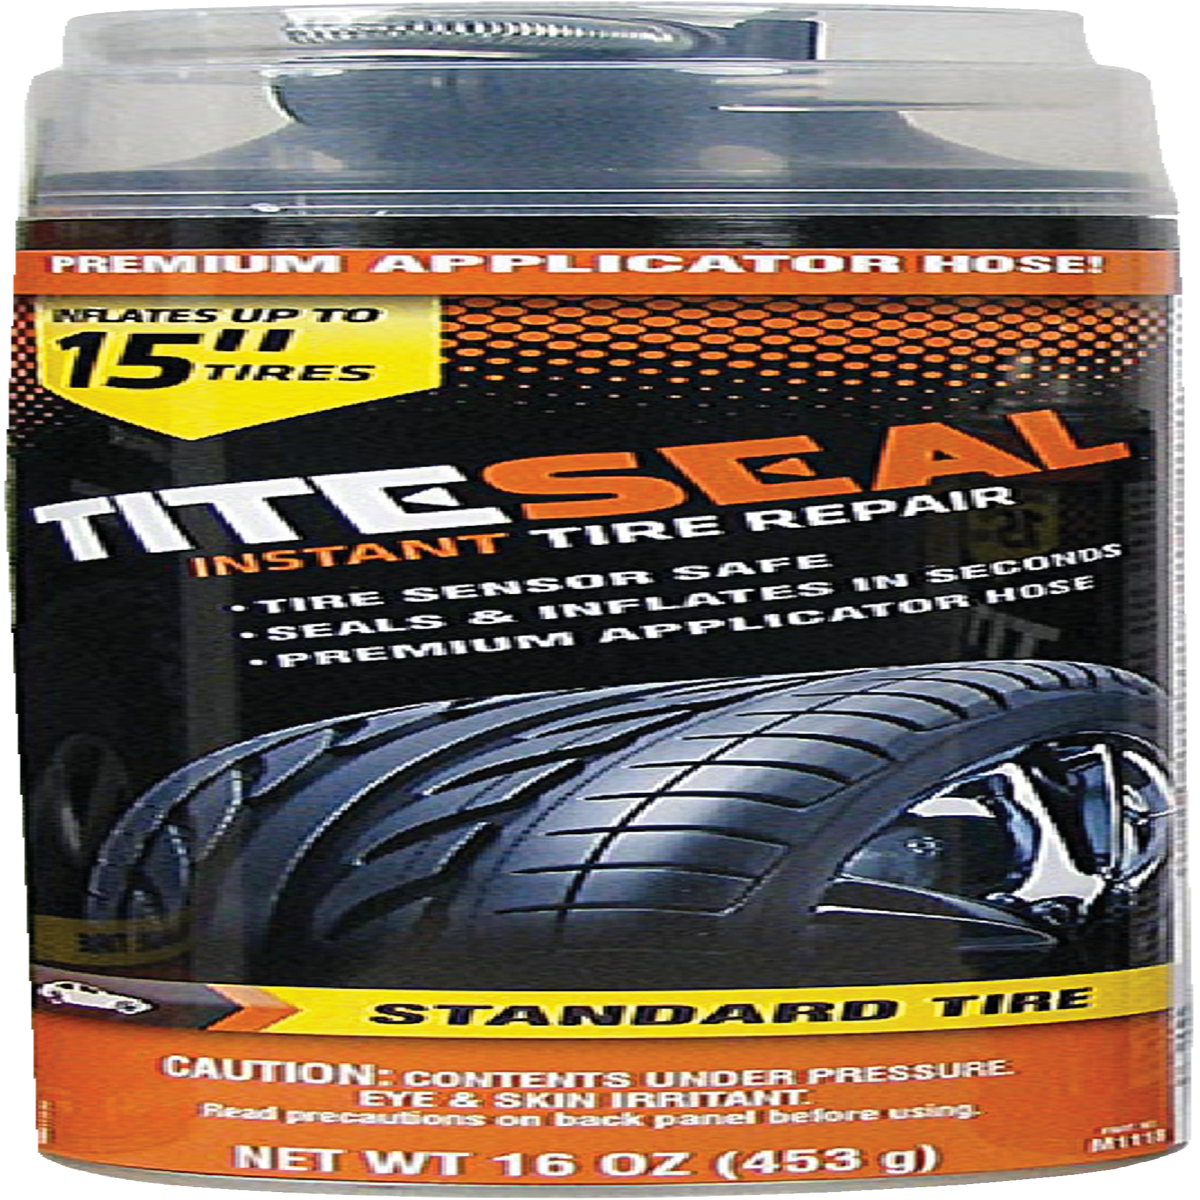 Tire Puncture Sealer and Inflator